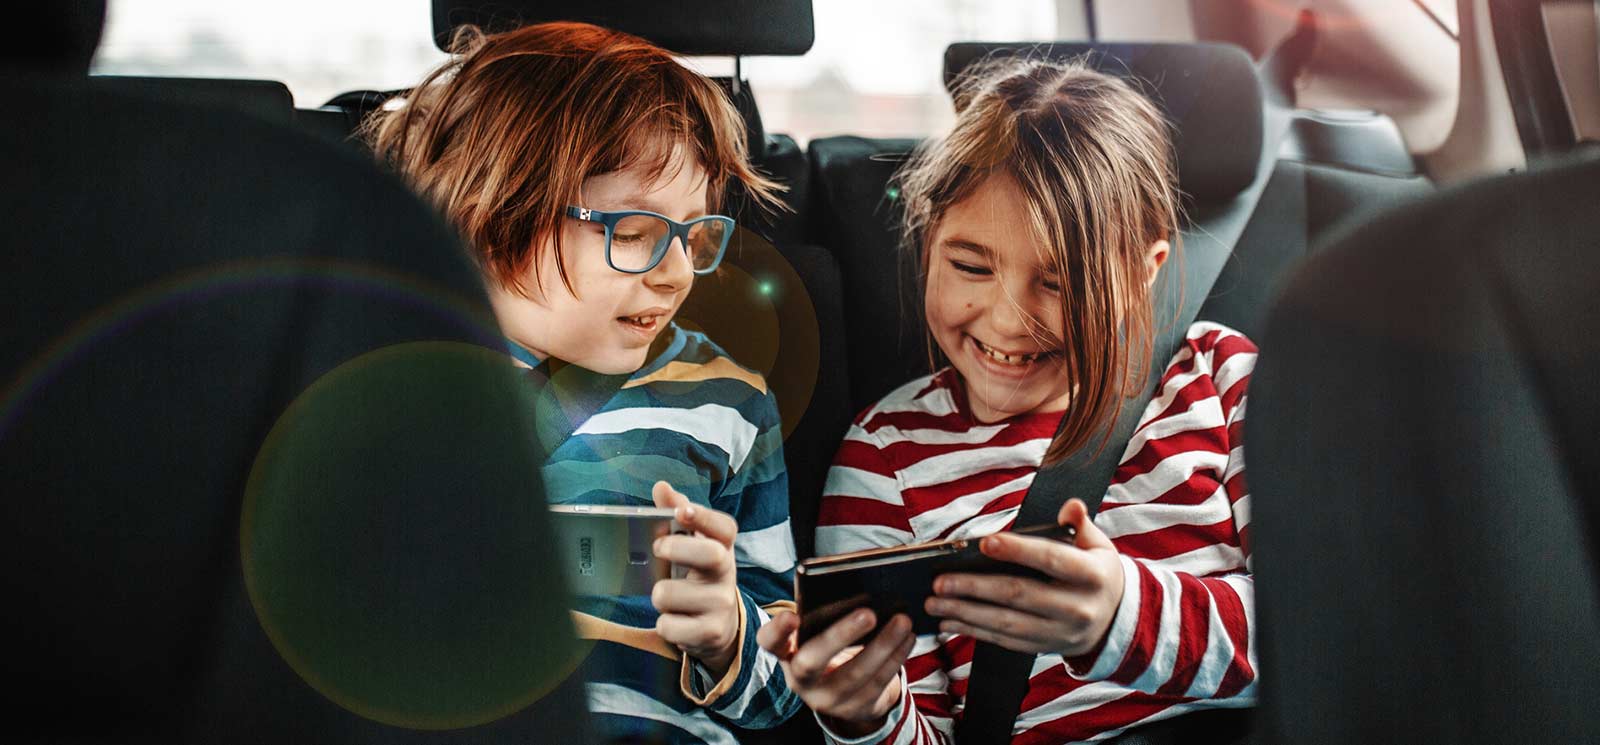 Two young kids in the backseat of a car looking at phones.